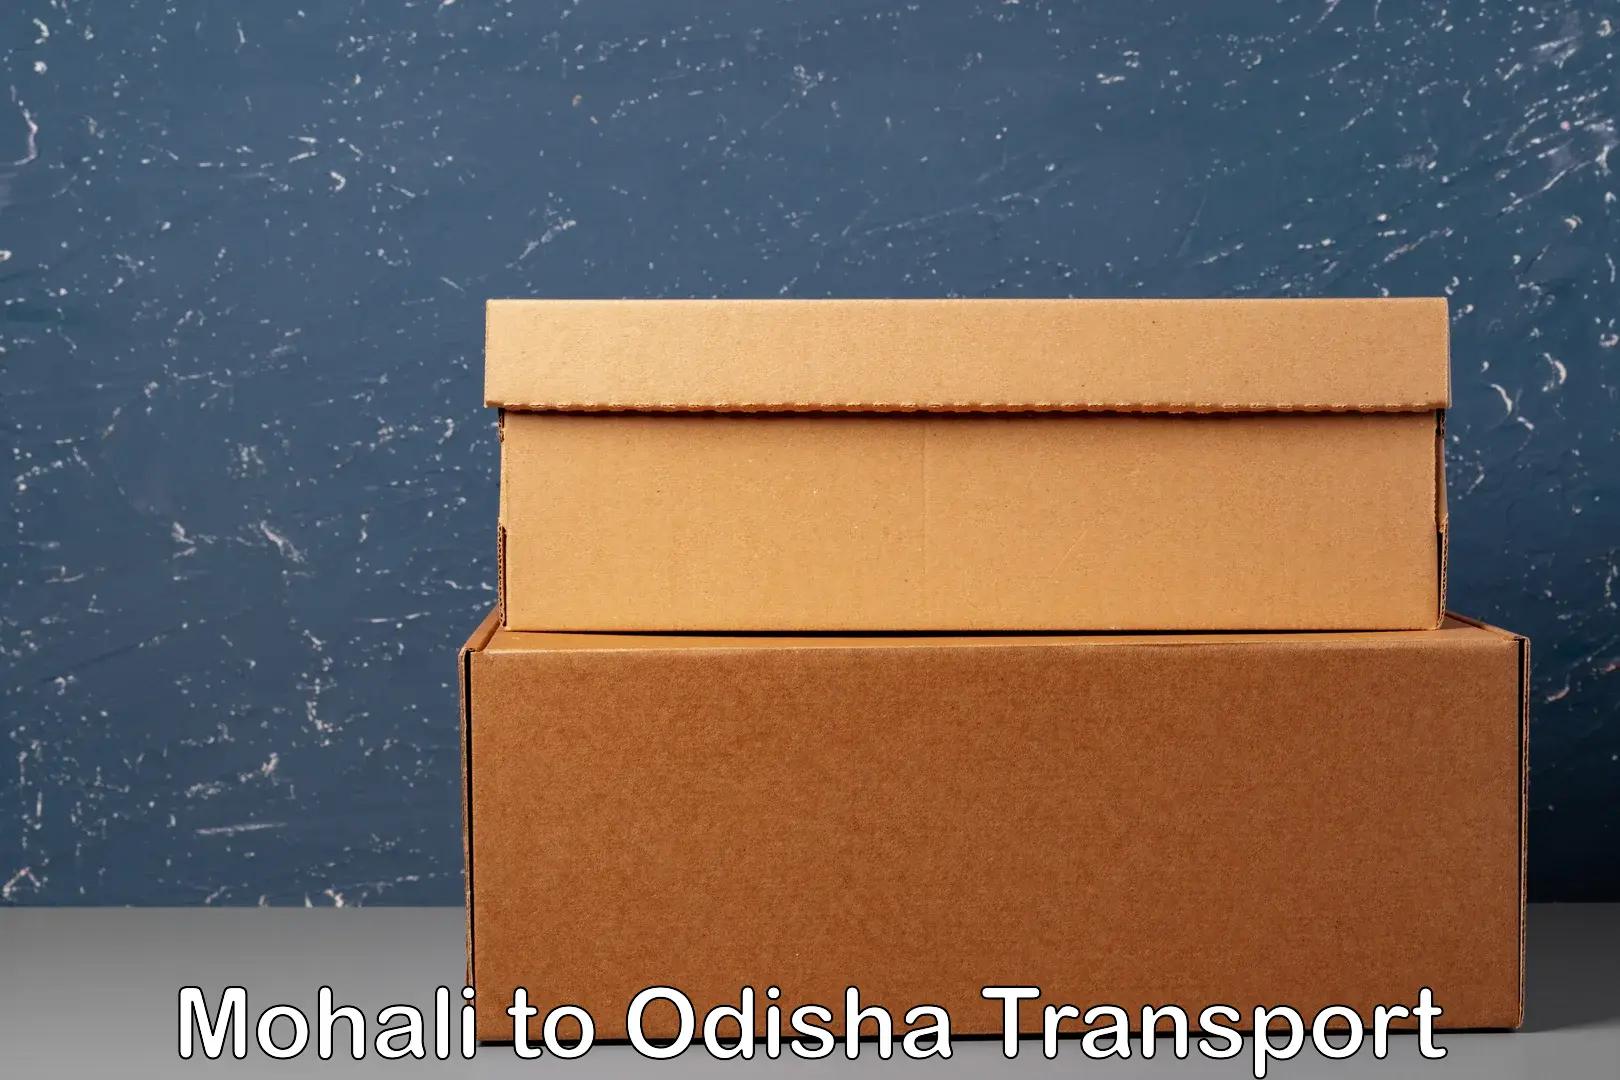 Shipping services in Mohali to Udala